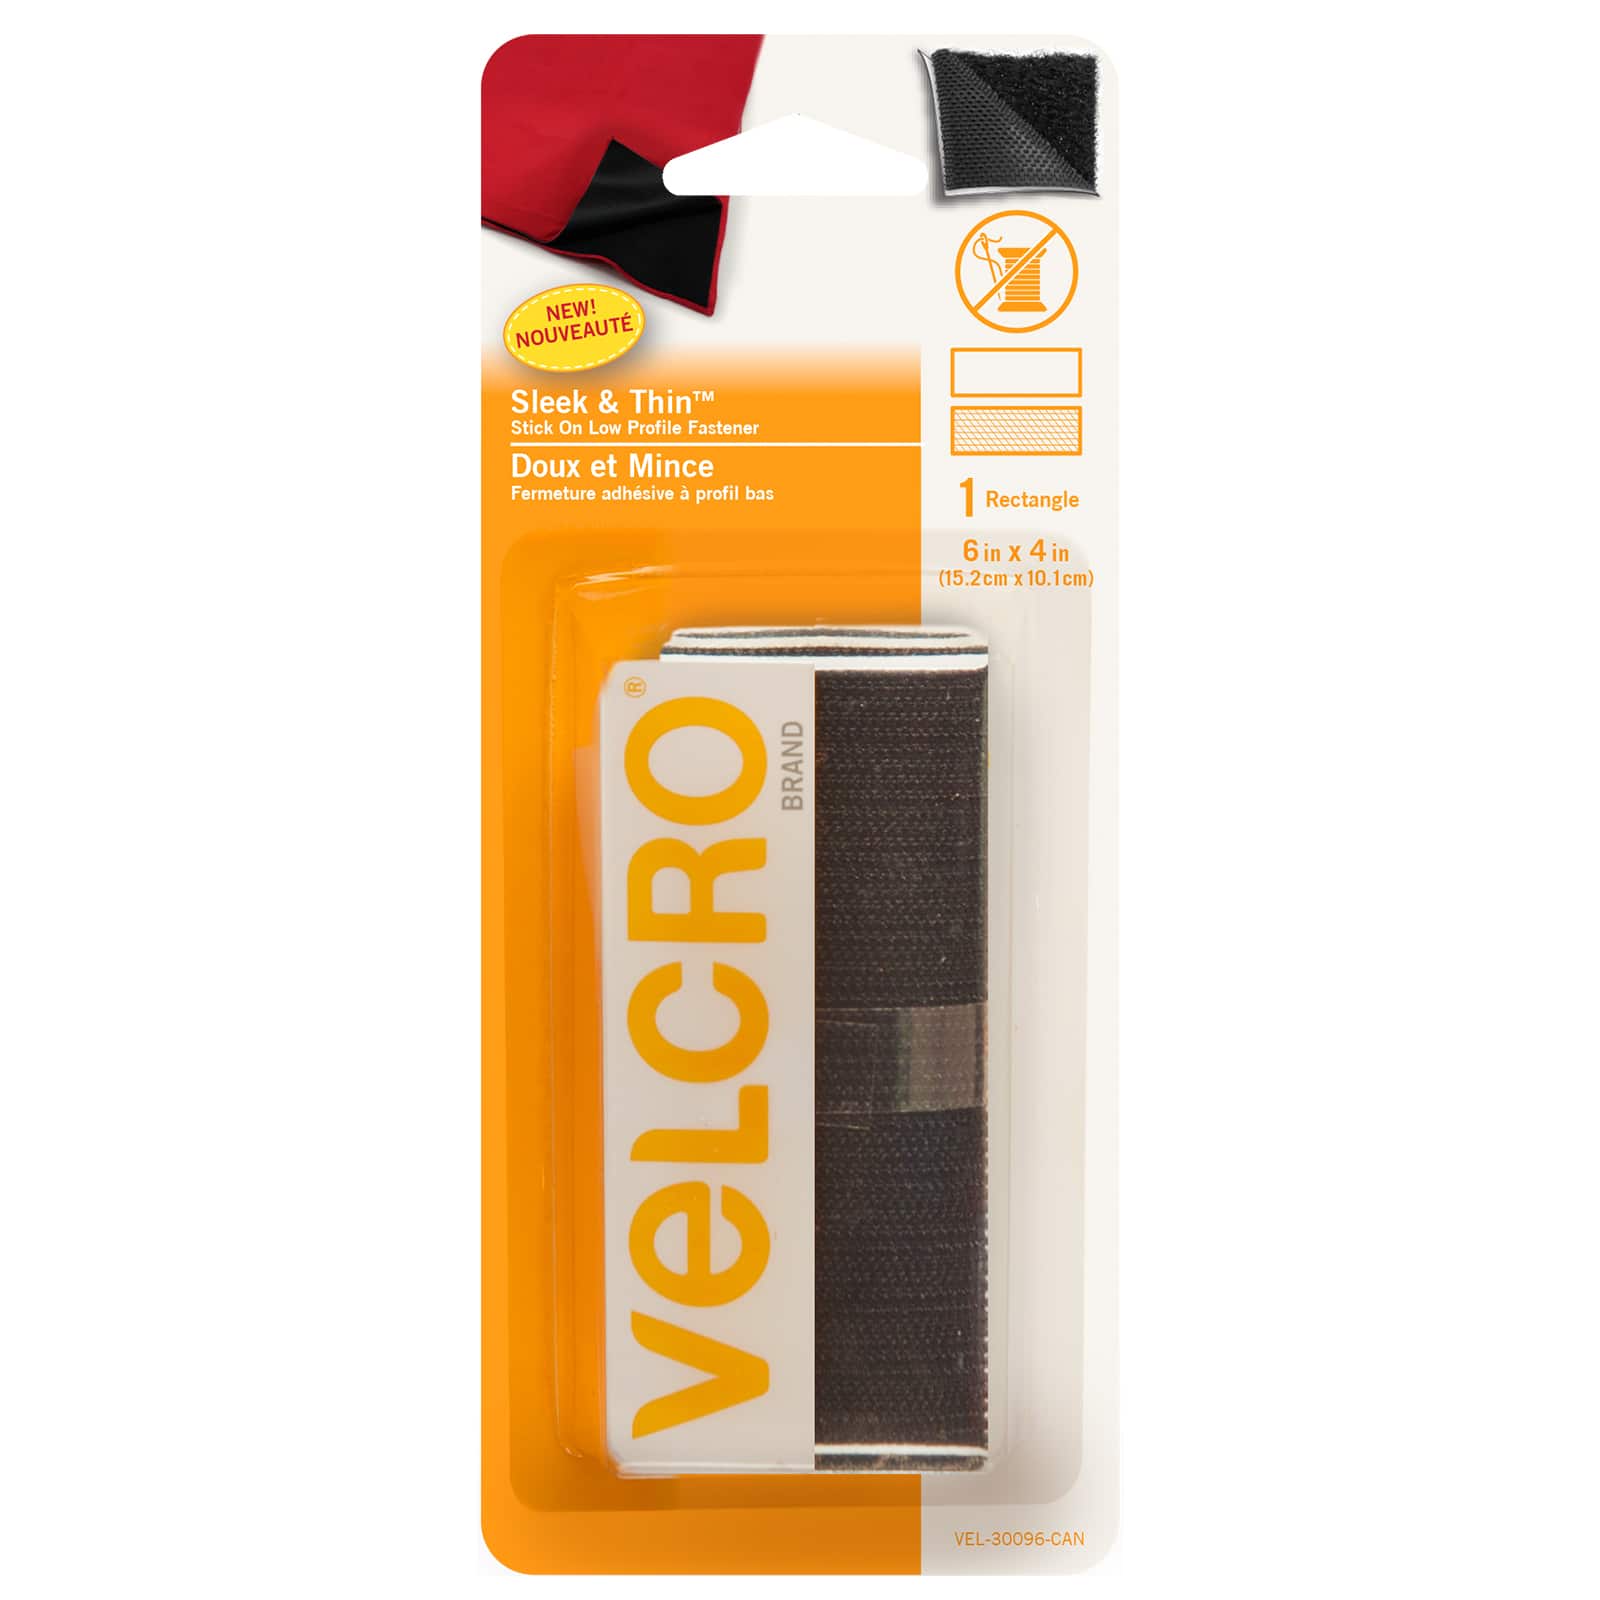 VELCRO® Brand Fasteners - Pyramid Educational Consultants of Canada